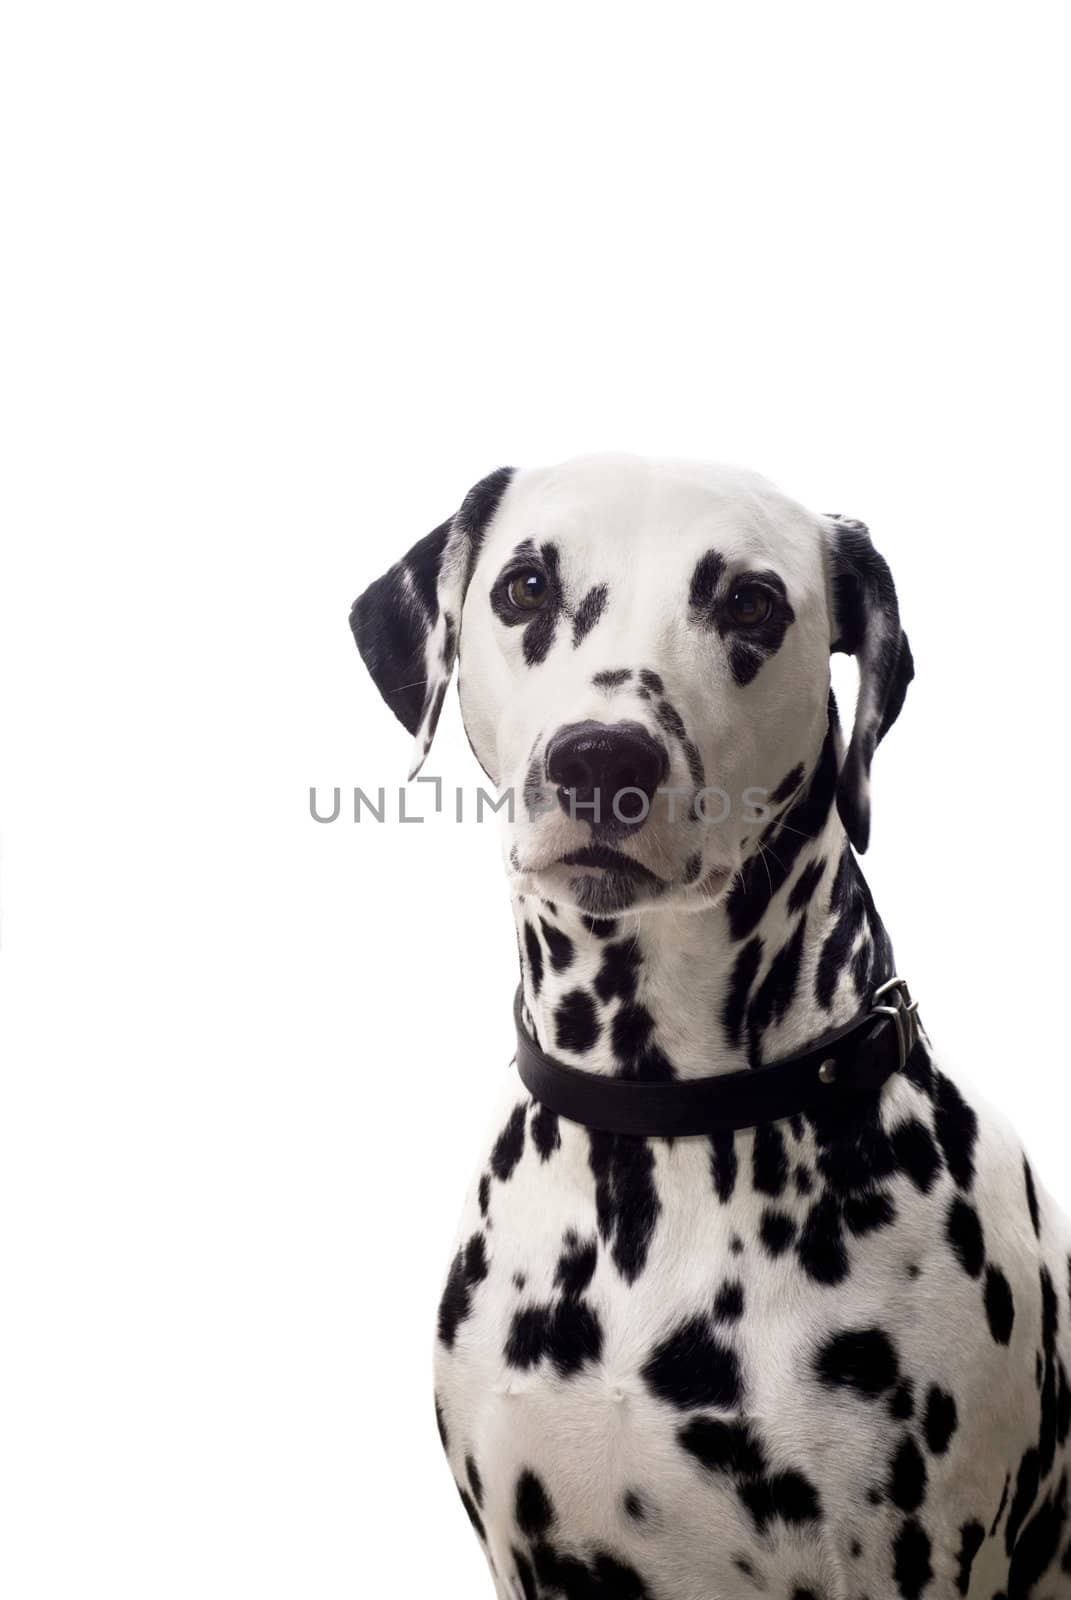 Dalmatian dog isolated on white with copyspace.